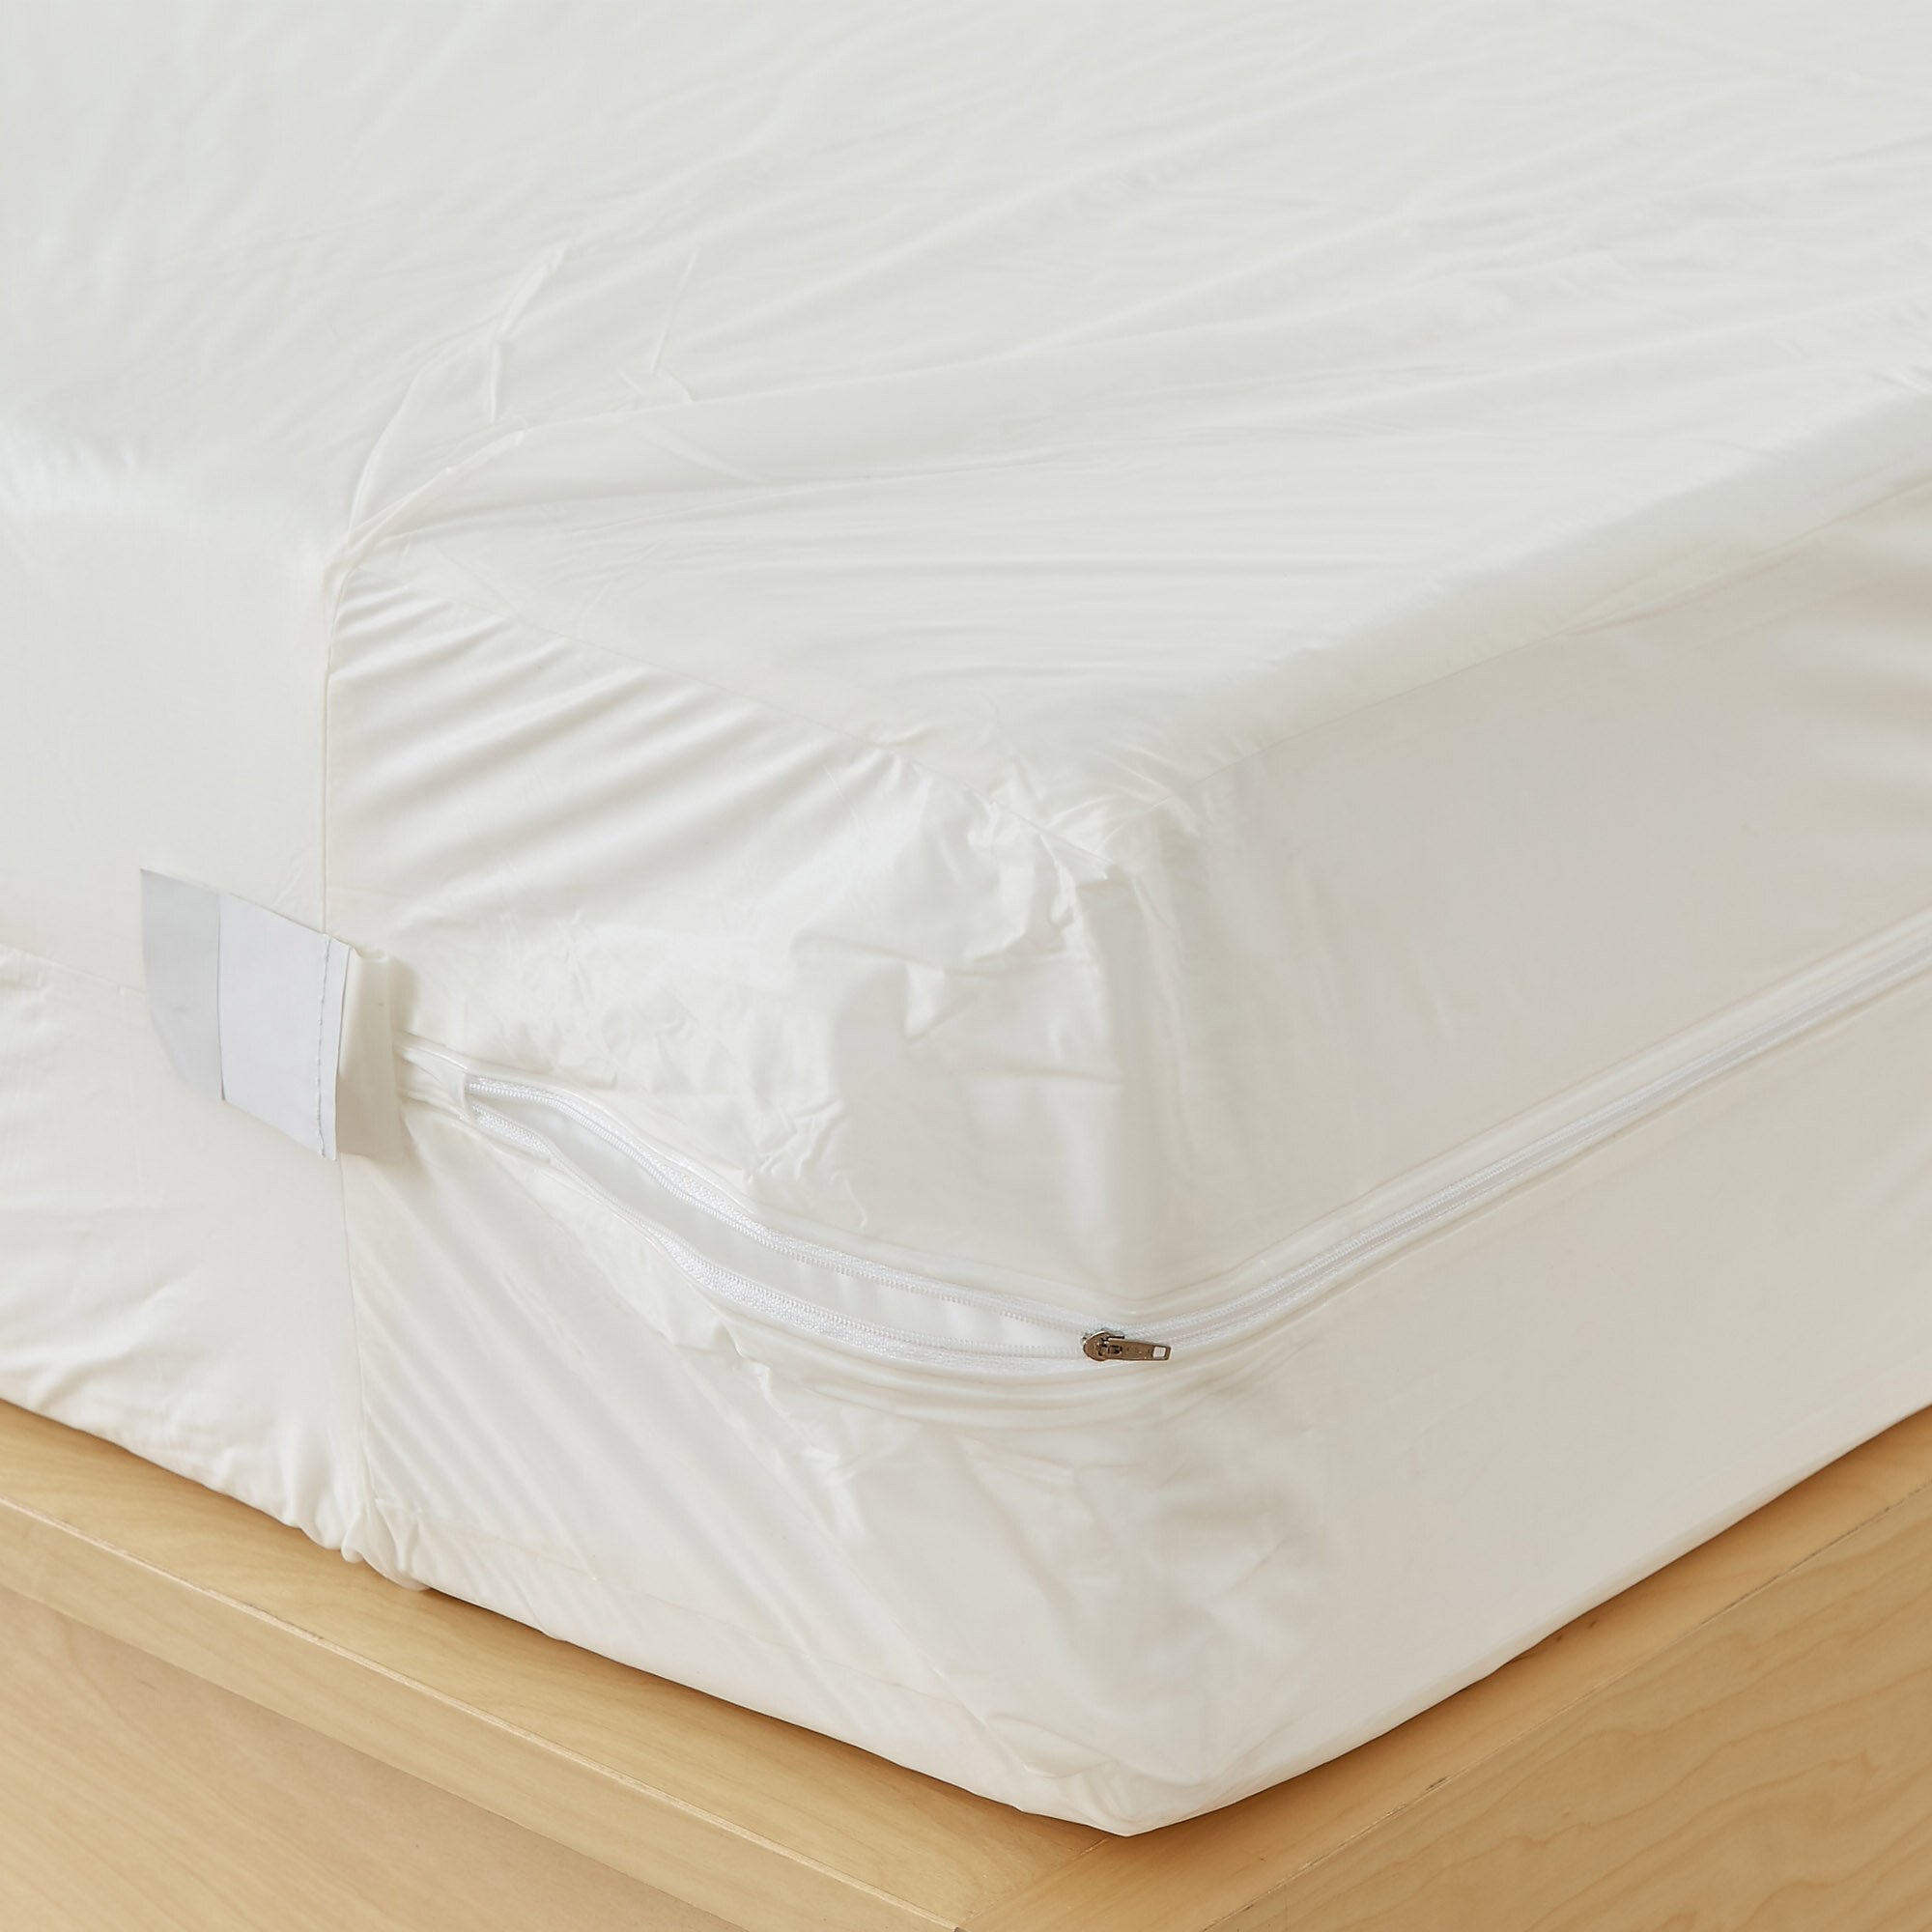 bed bug proof mattress cover amazon